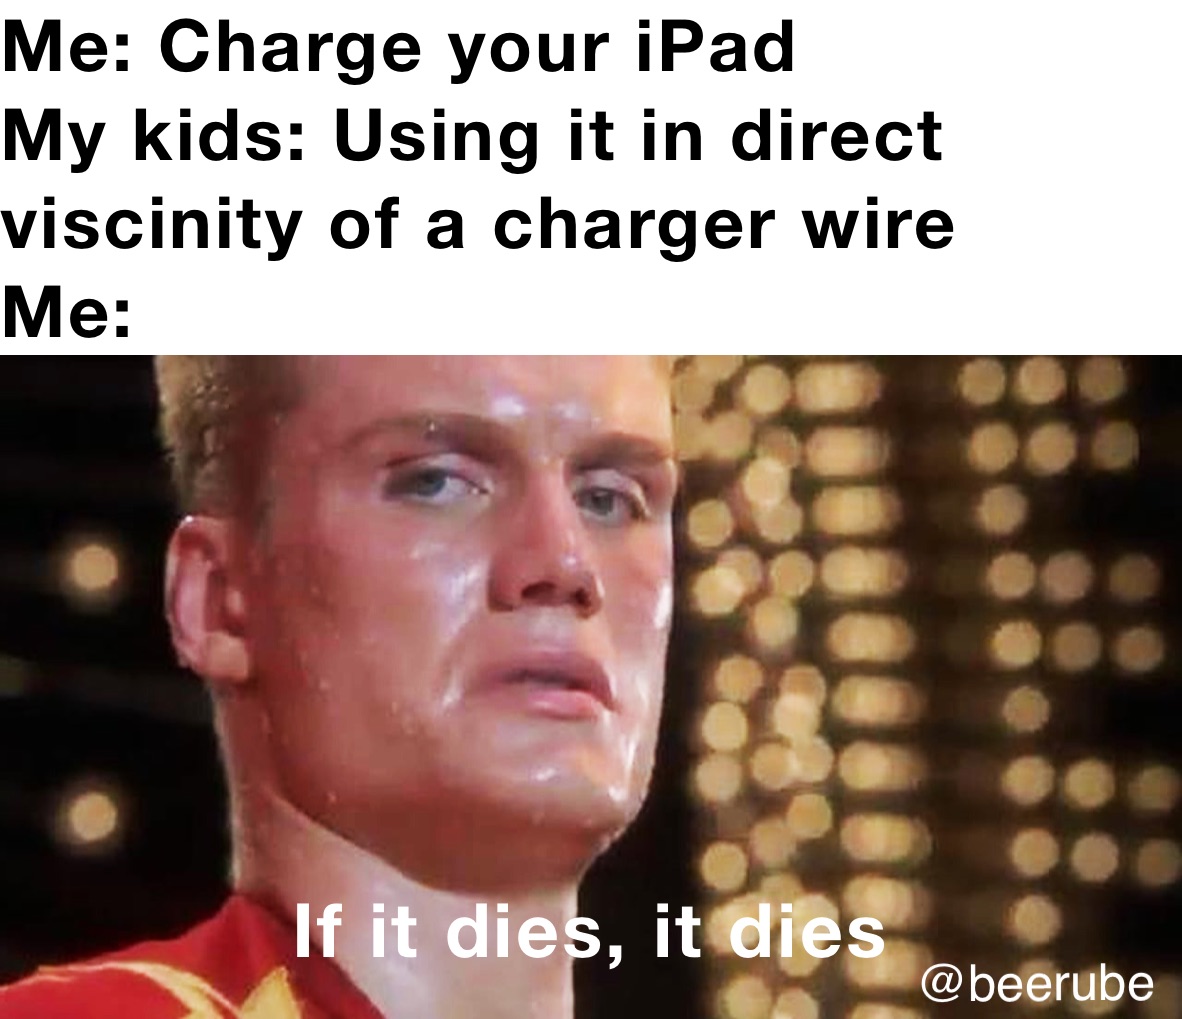 Me: Charge your iPad
My kids: Using it in direct viscinity of a charger wire
Me: If it dies, it dies